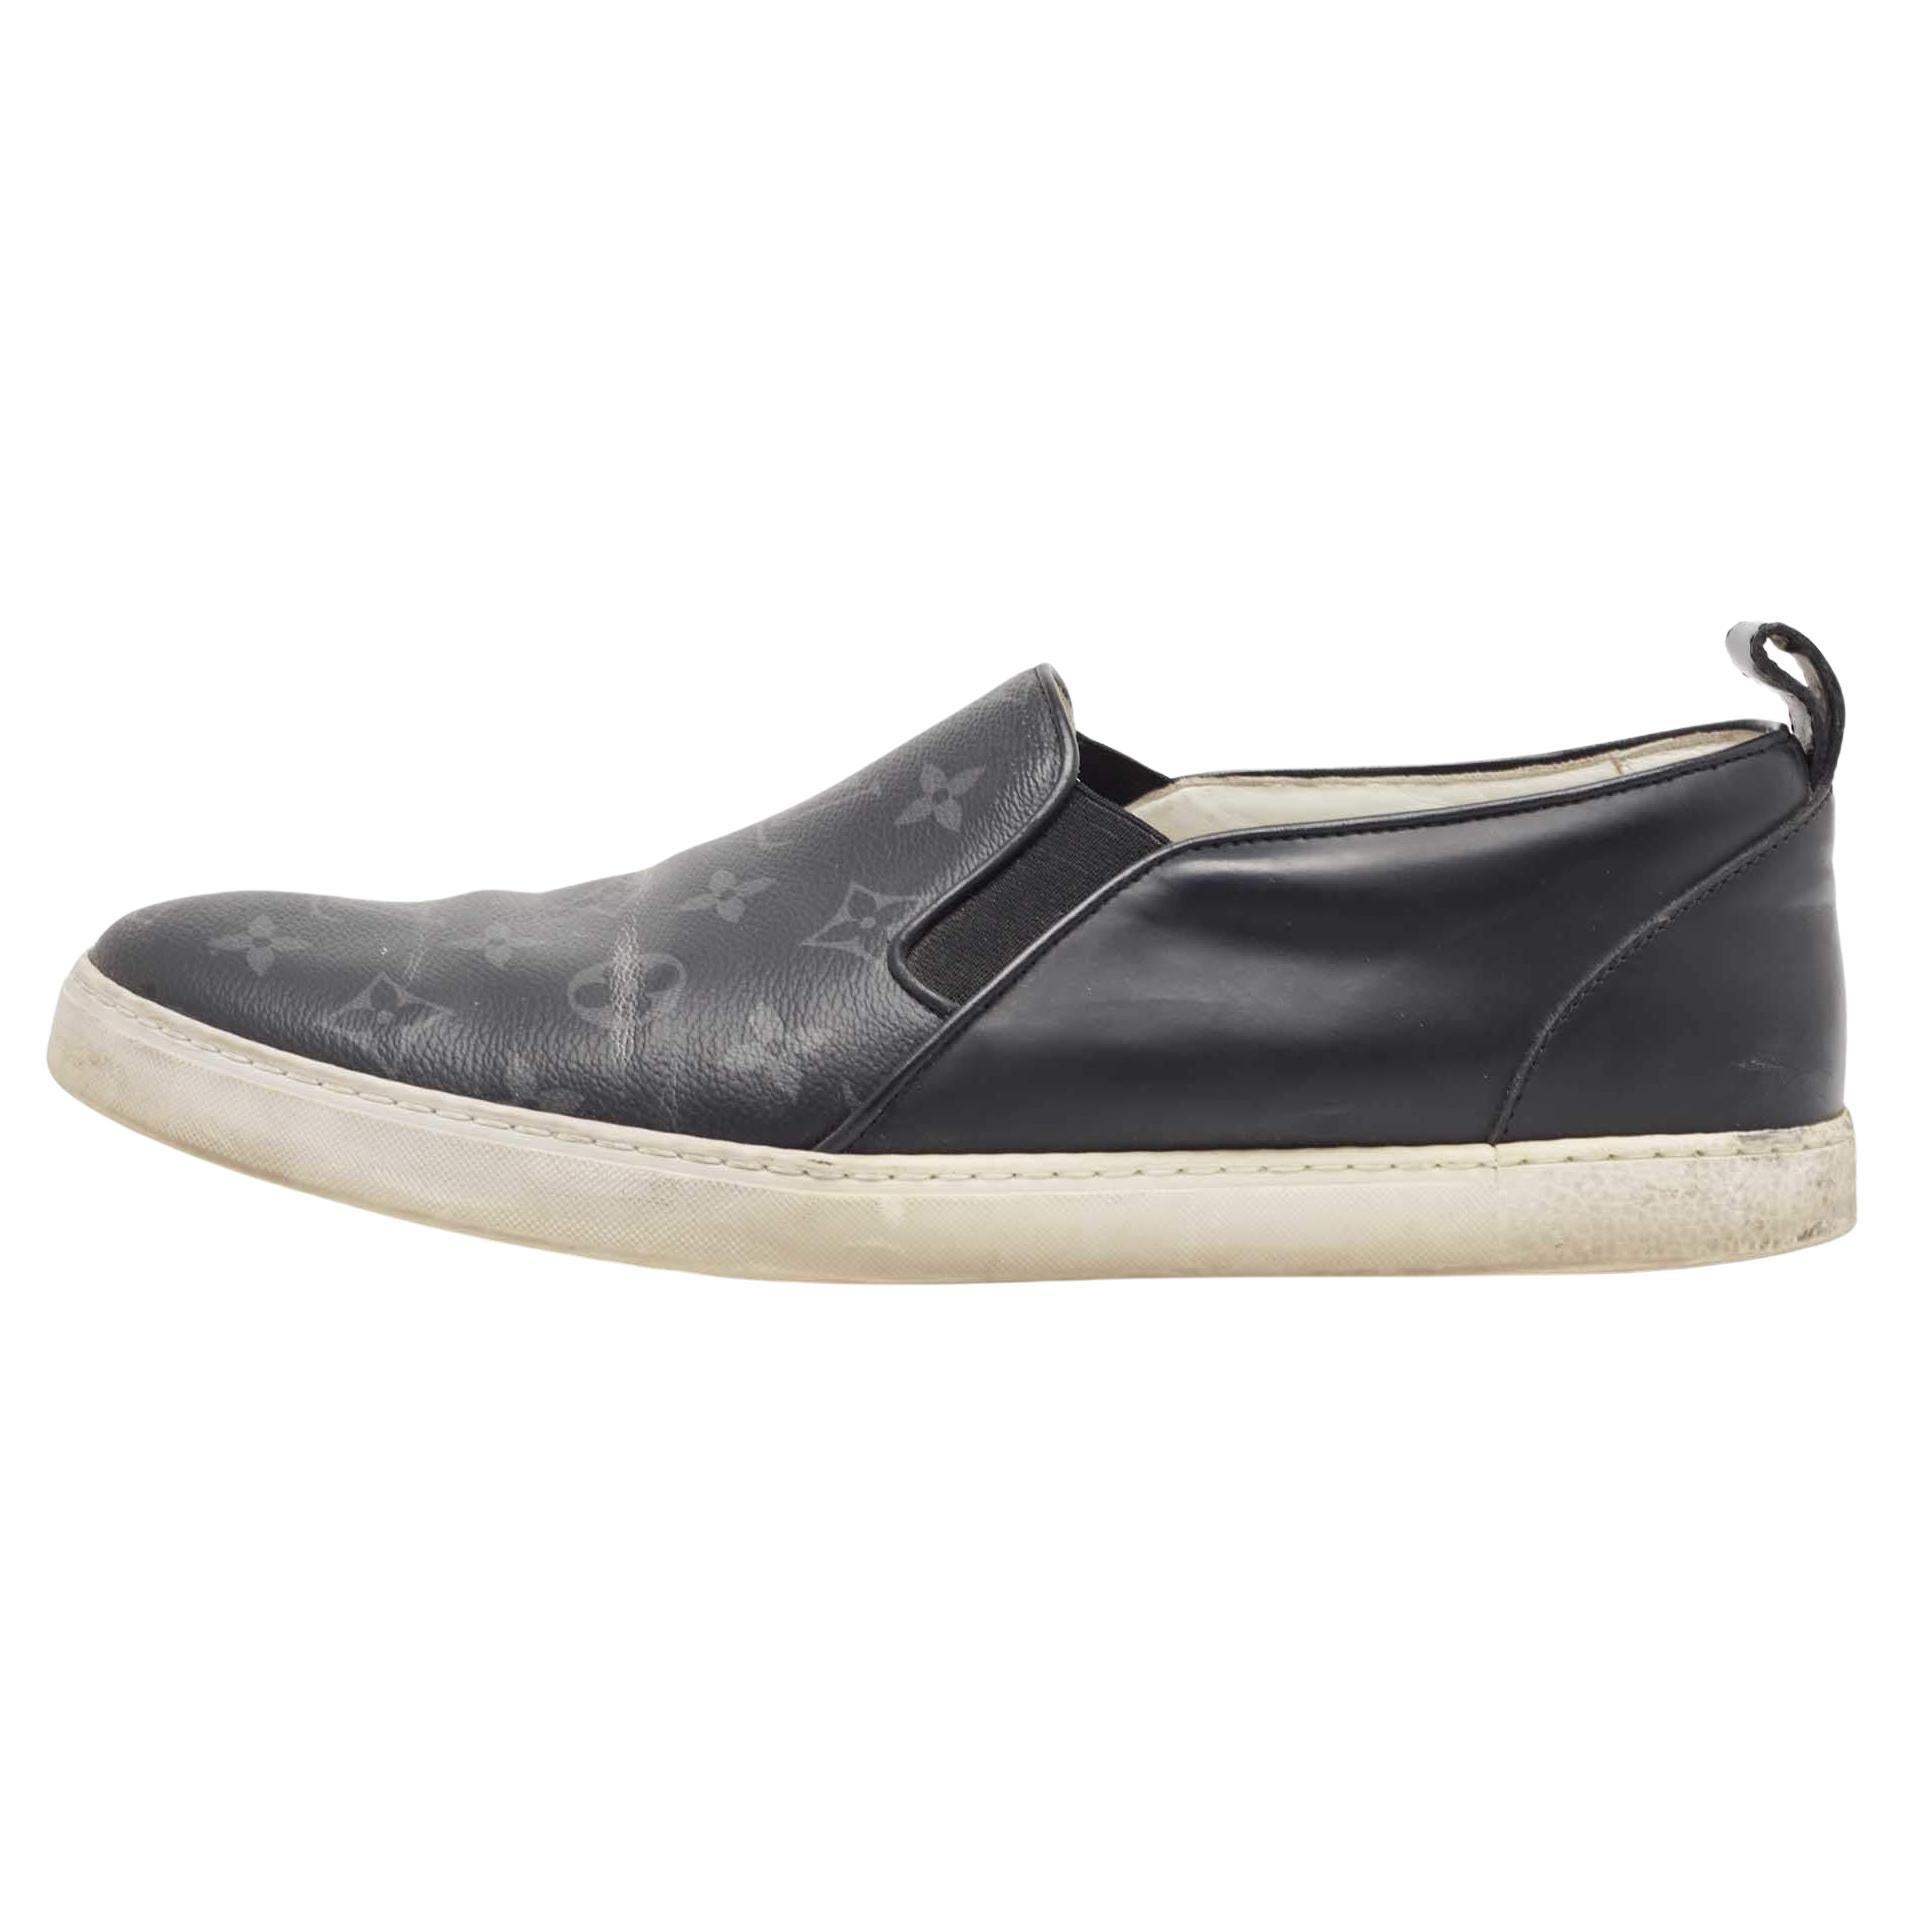 Louis Vuitton Black/Grey Monogram Canvas and Leather Slip On Sneakers Size 42.5 For Sale